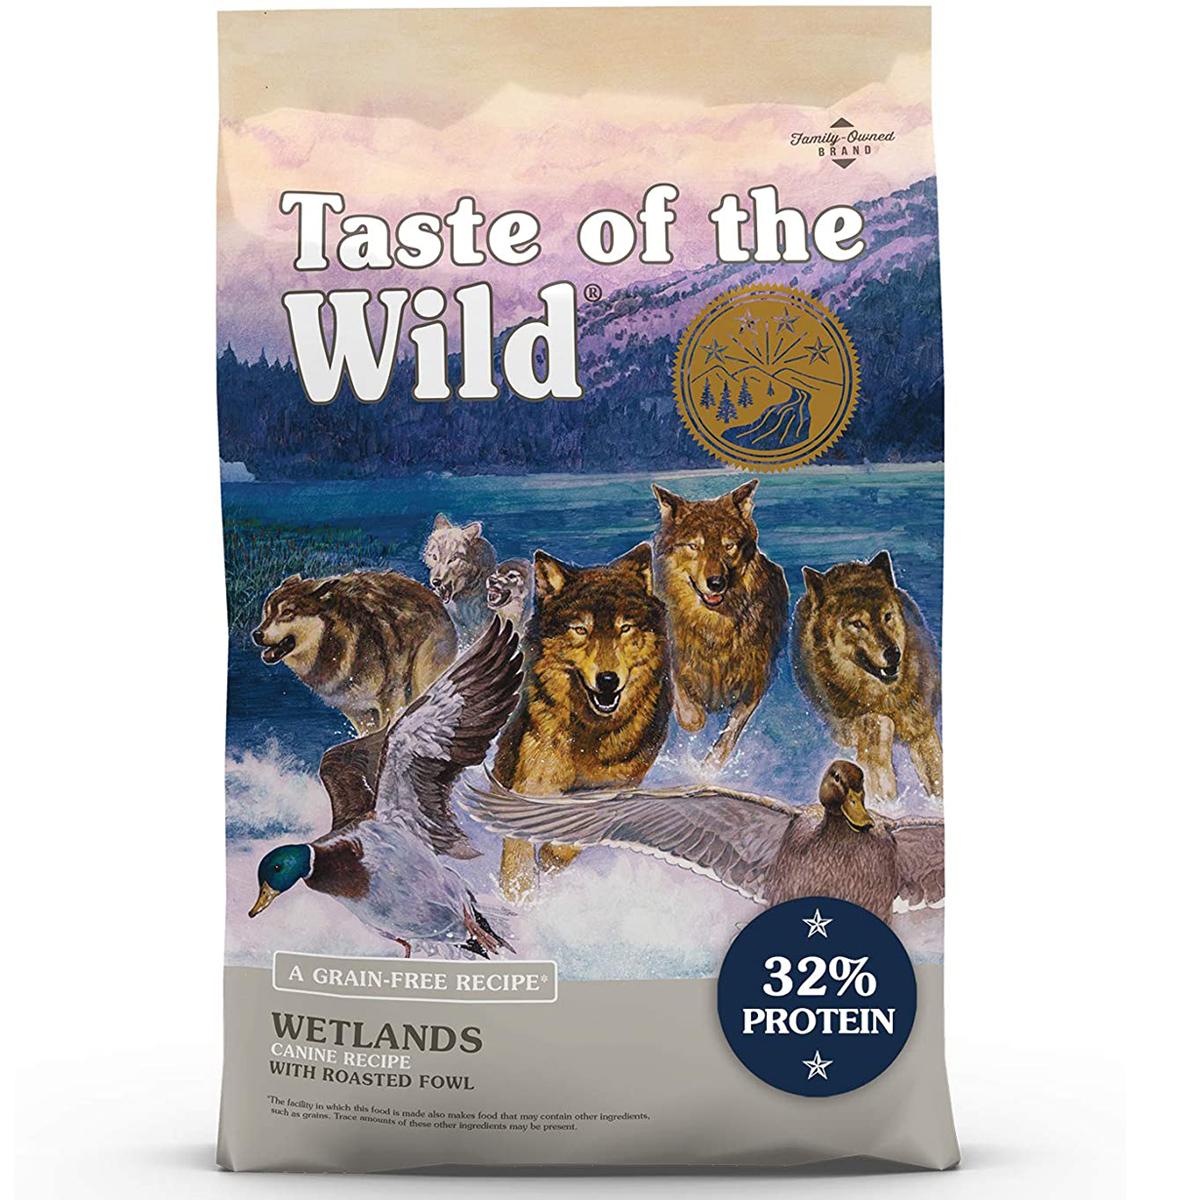 Taste of the Wild GrainFree Dry Dog Food for 25.82 Shipped